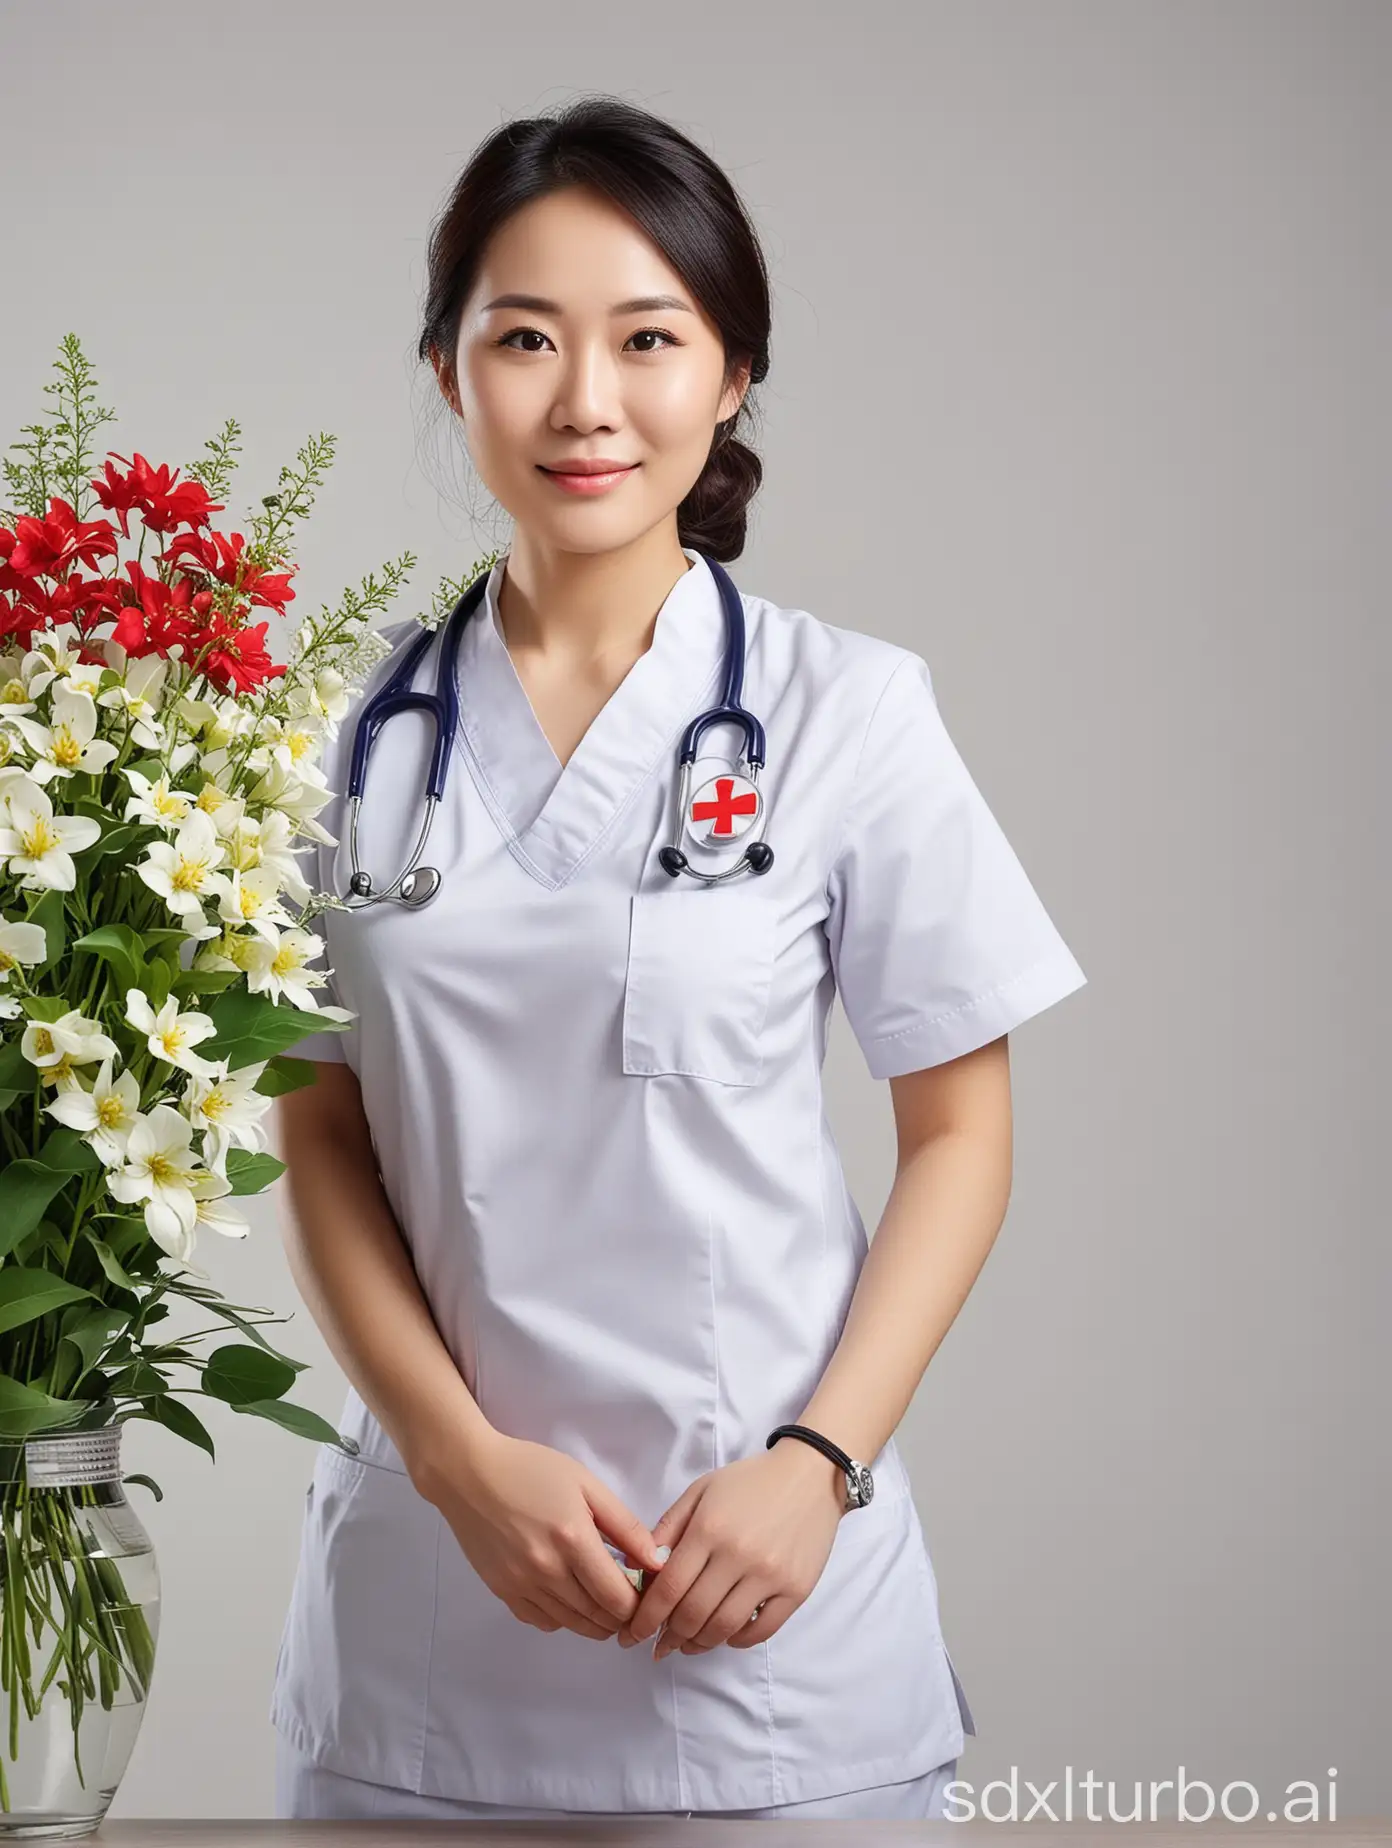 Chinese-Nurse-in-Professional-Medical-Uniform-with-Stethoscope-and-Floral-Bouquet